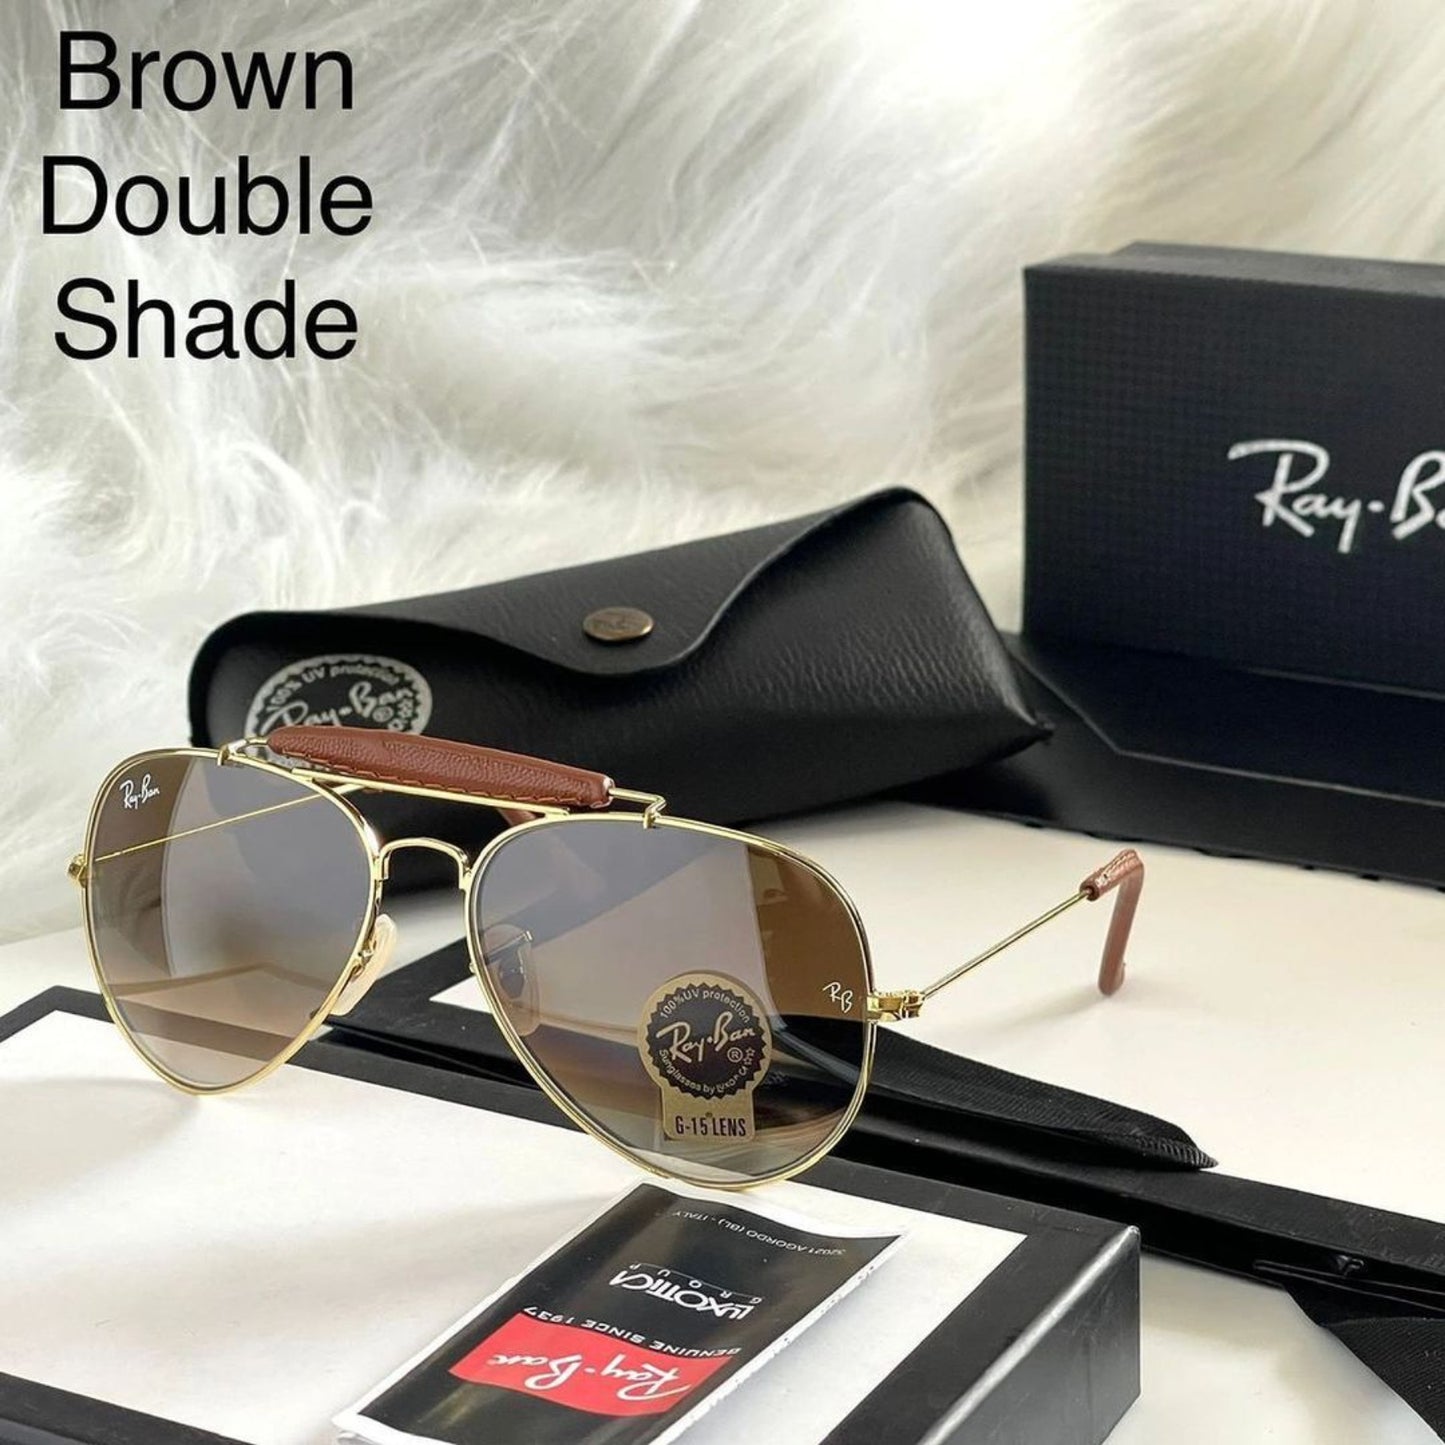 New Attractive Looking Brown Shaded & Gold 3422 Fancy Aviator Bridge Sunglass For Unisex